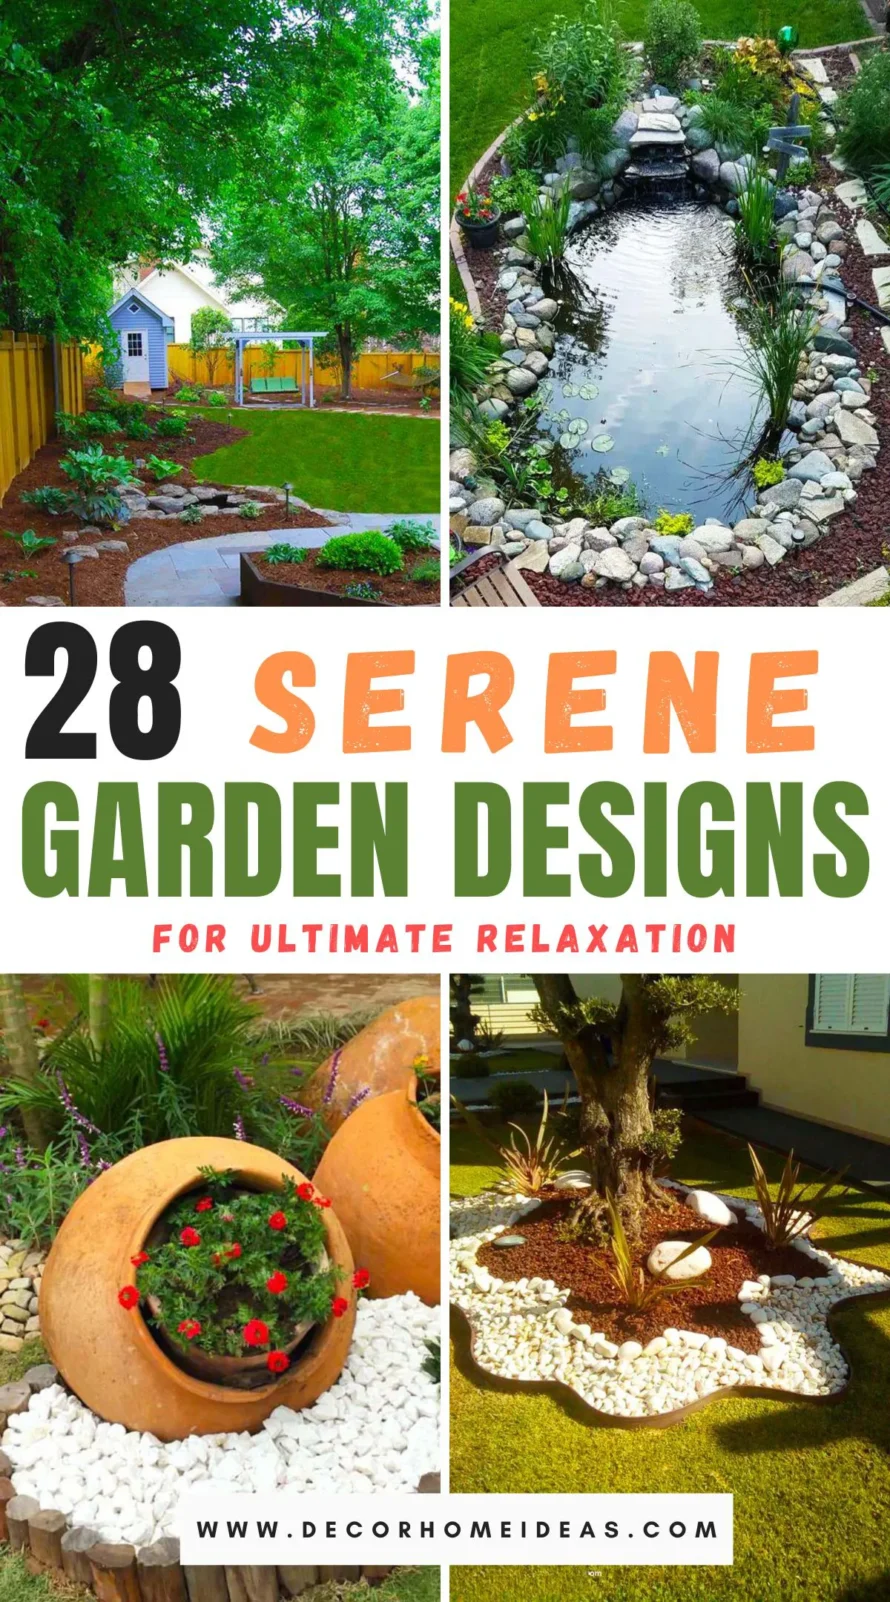 Explore 28 serene garden designs perfect for crafting a tranquil retreat right in your backyard. These inspiring ideas blend soothing water features, cozy seating, and aromatic plants to create the ultimate relaxation spot. 